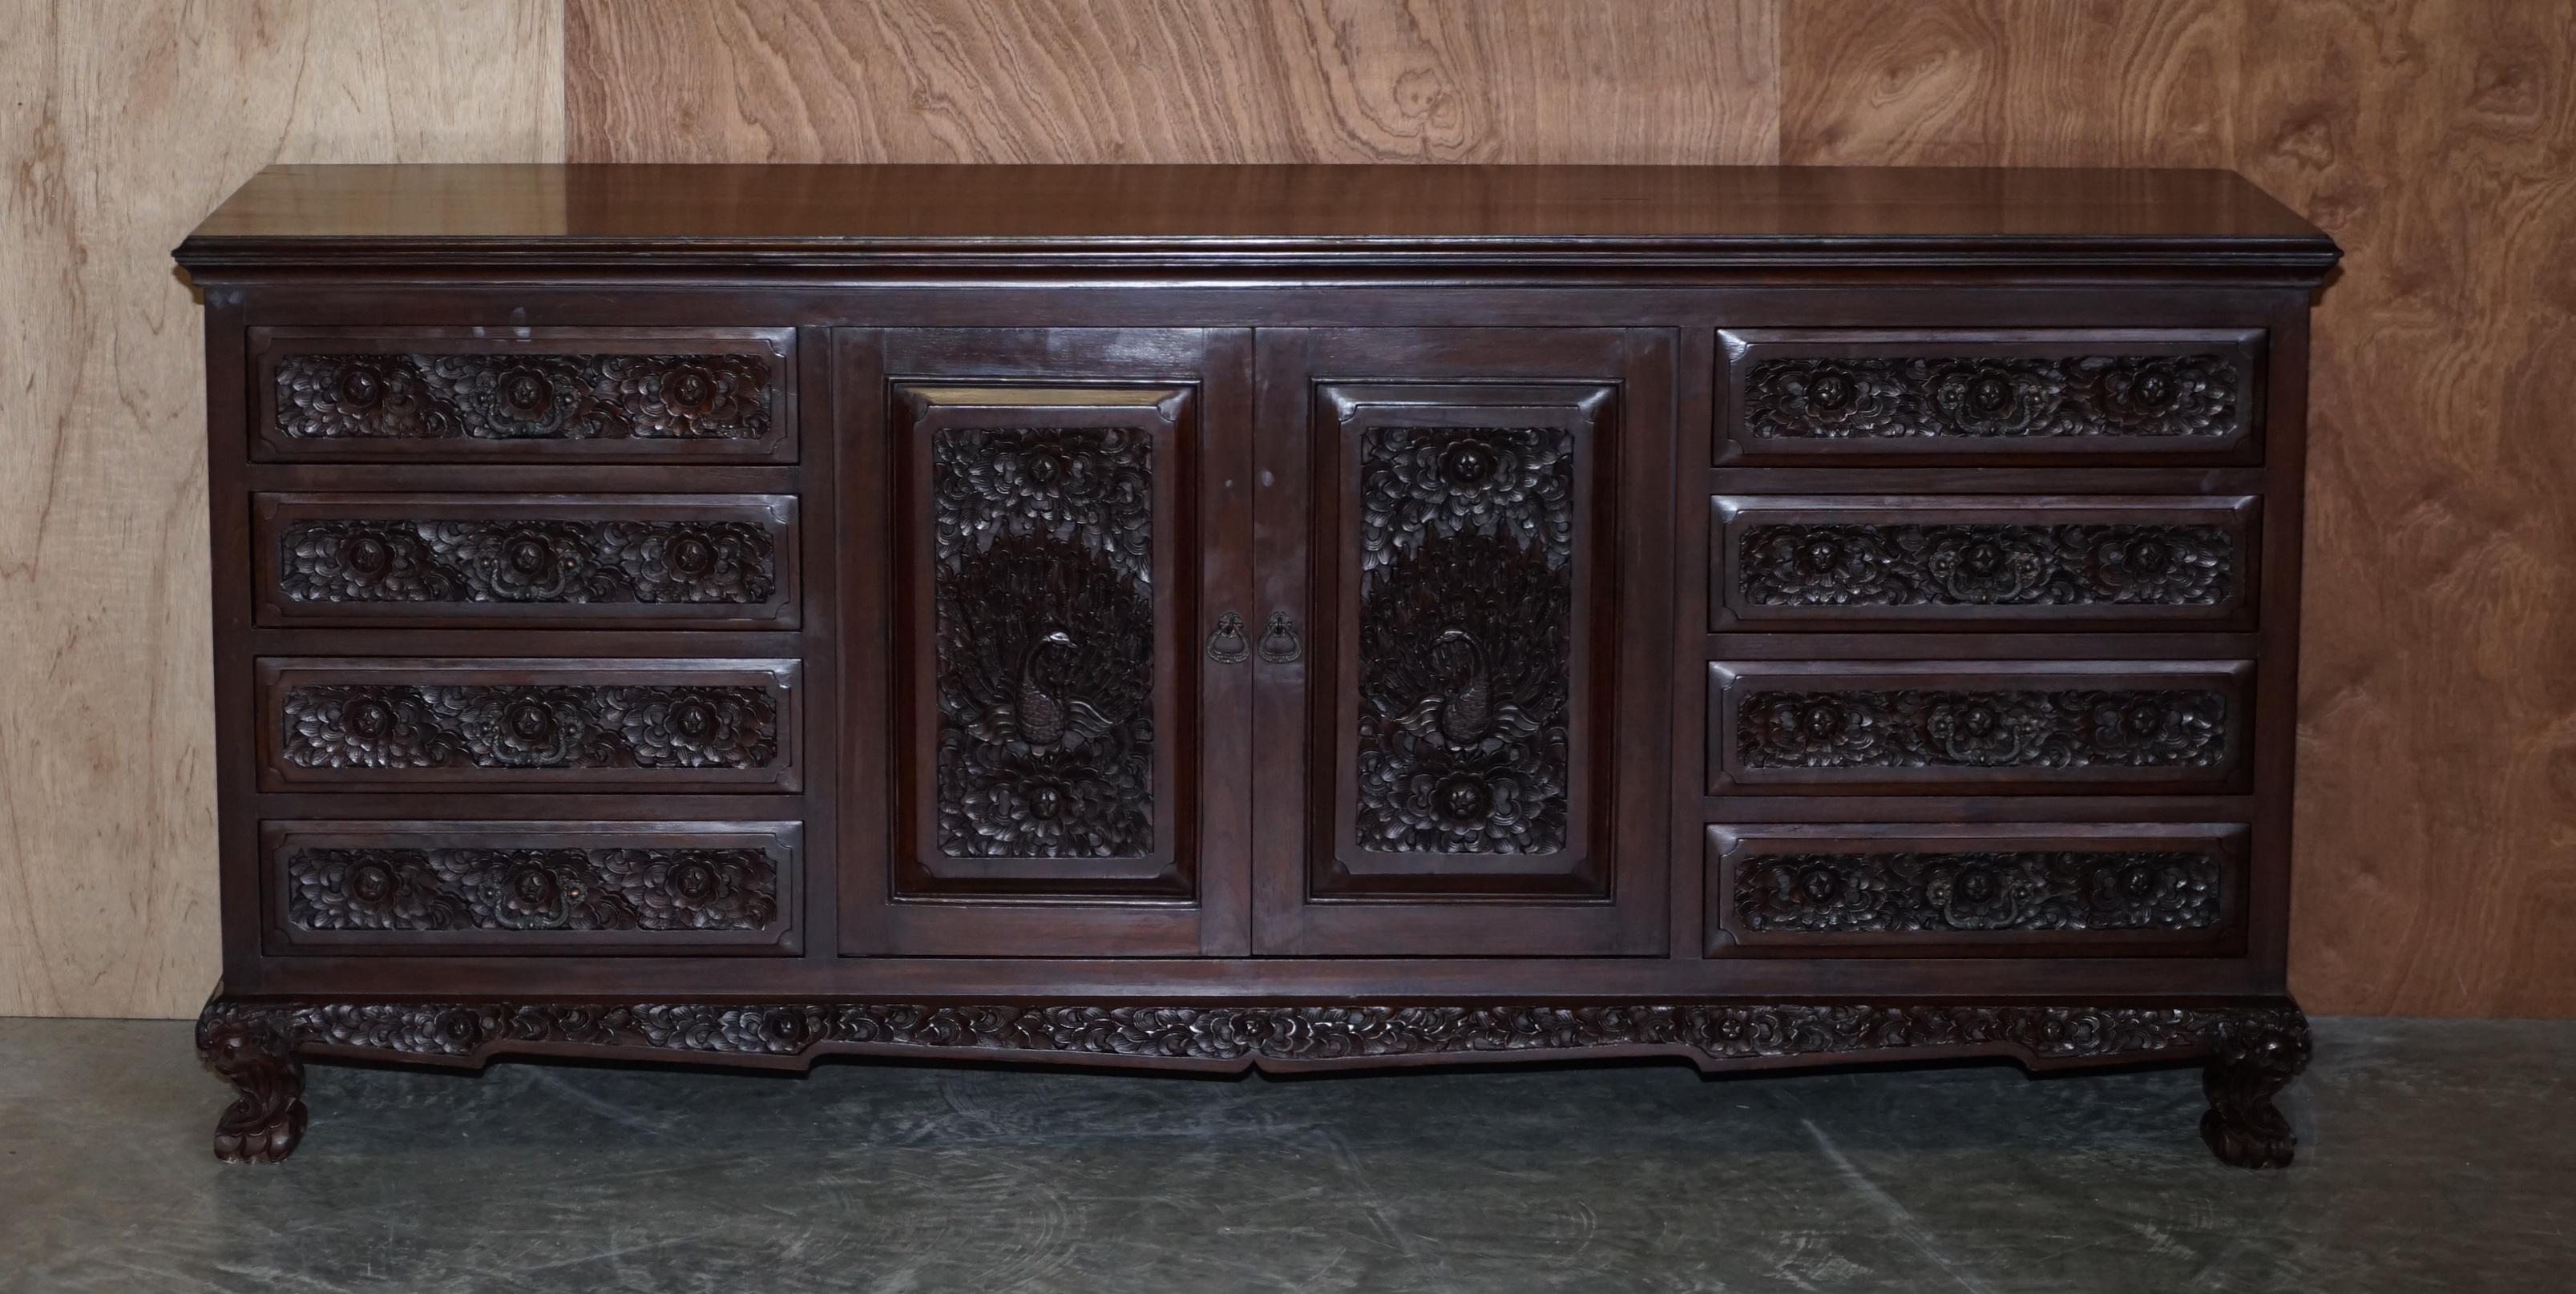 We are delighted to offer for sale this lovely hand carved Indian Rosewood sideboard with drawers

A good looking and nicely made piece, its very decorative being heavily carved from top to bottom, this is like art furniture, you have floral